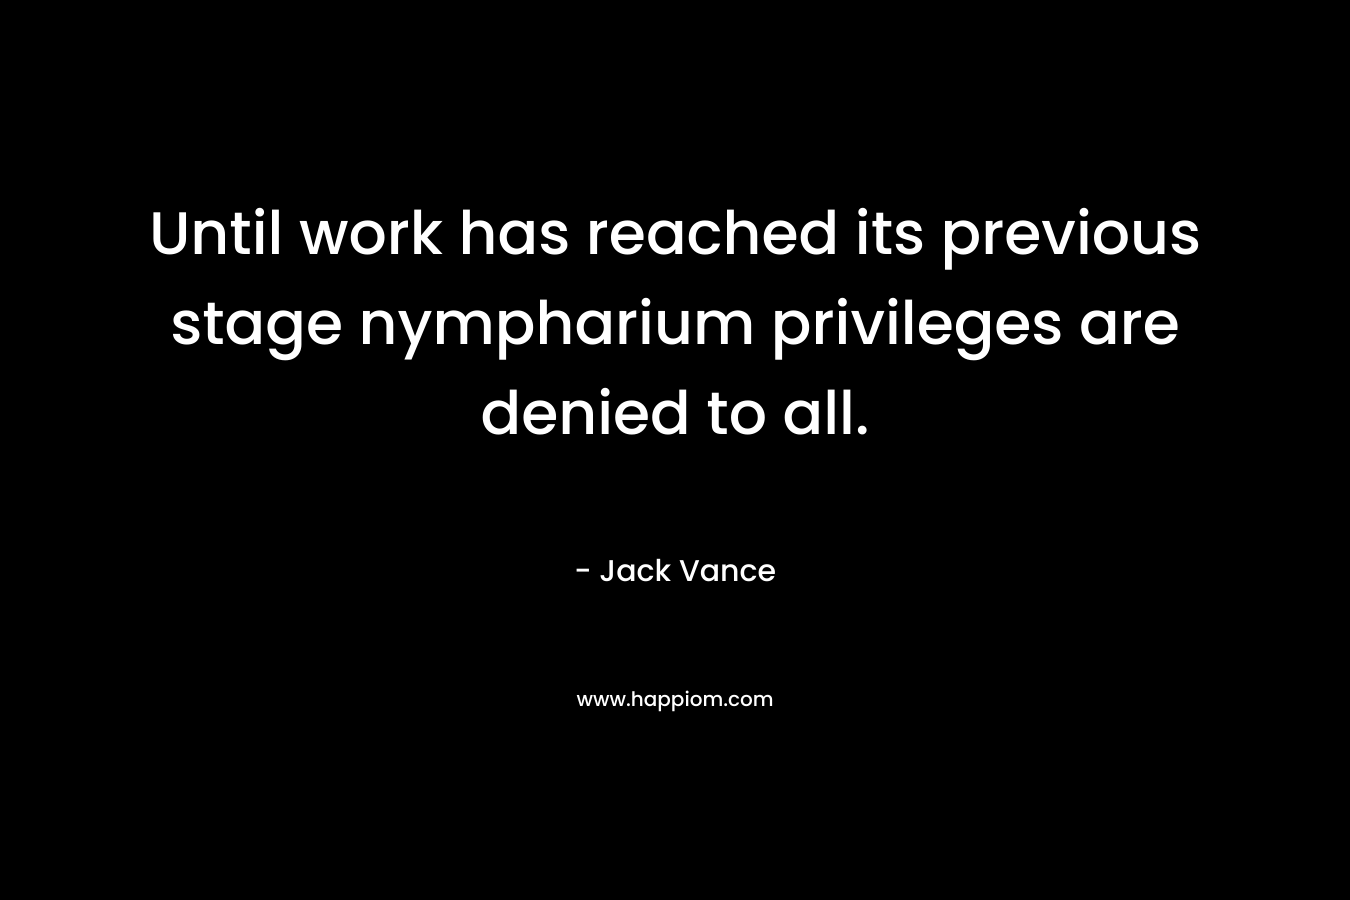 Until work has reached its previous stage nympharium privileges are denied to all. – Jack Vance